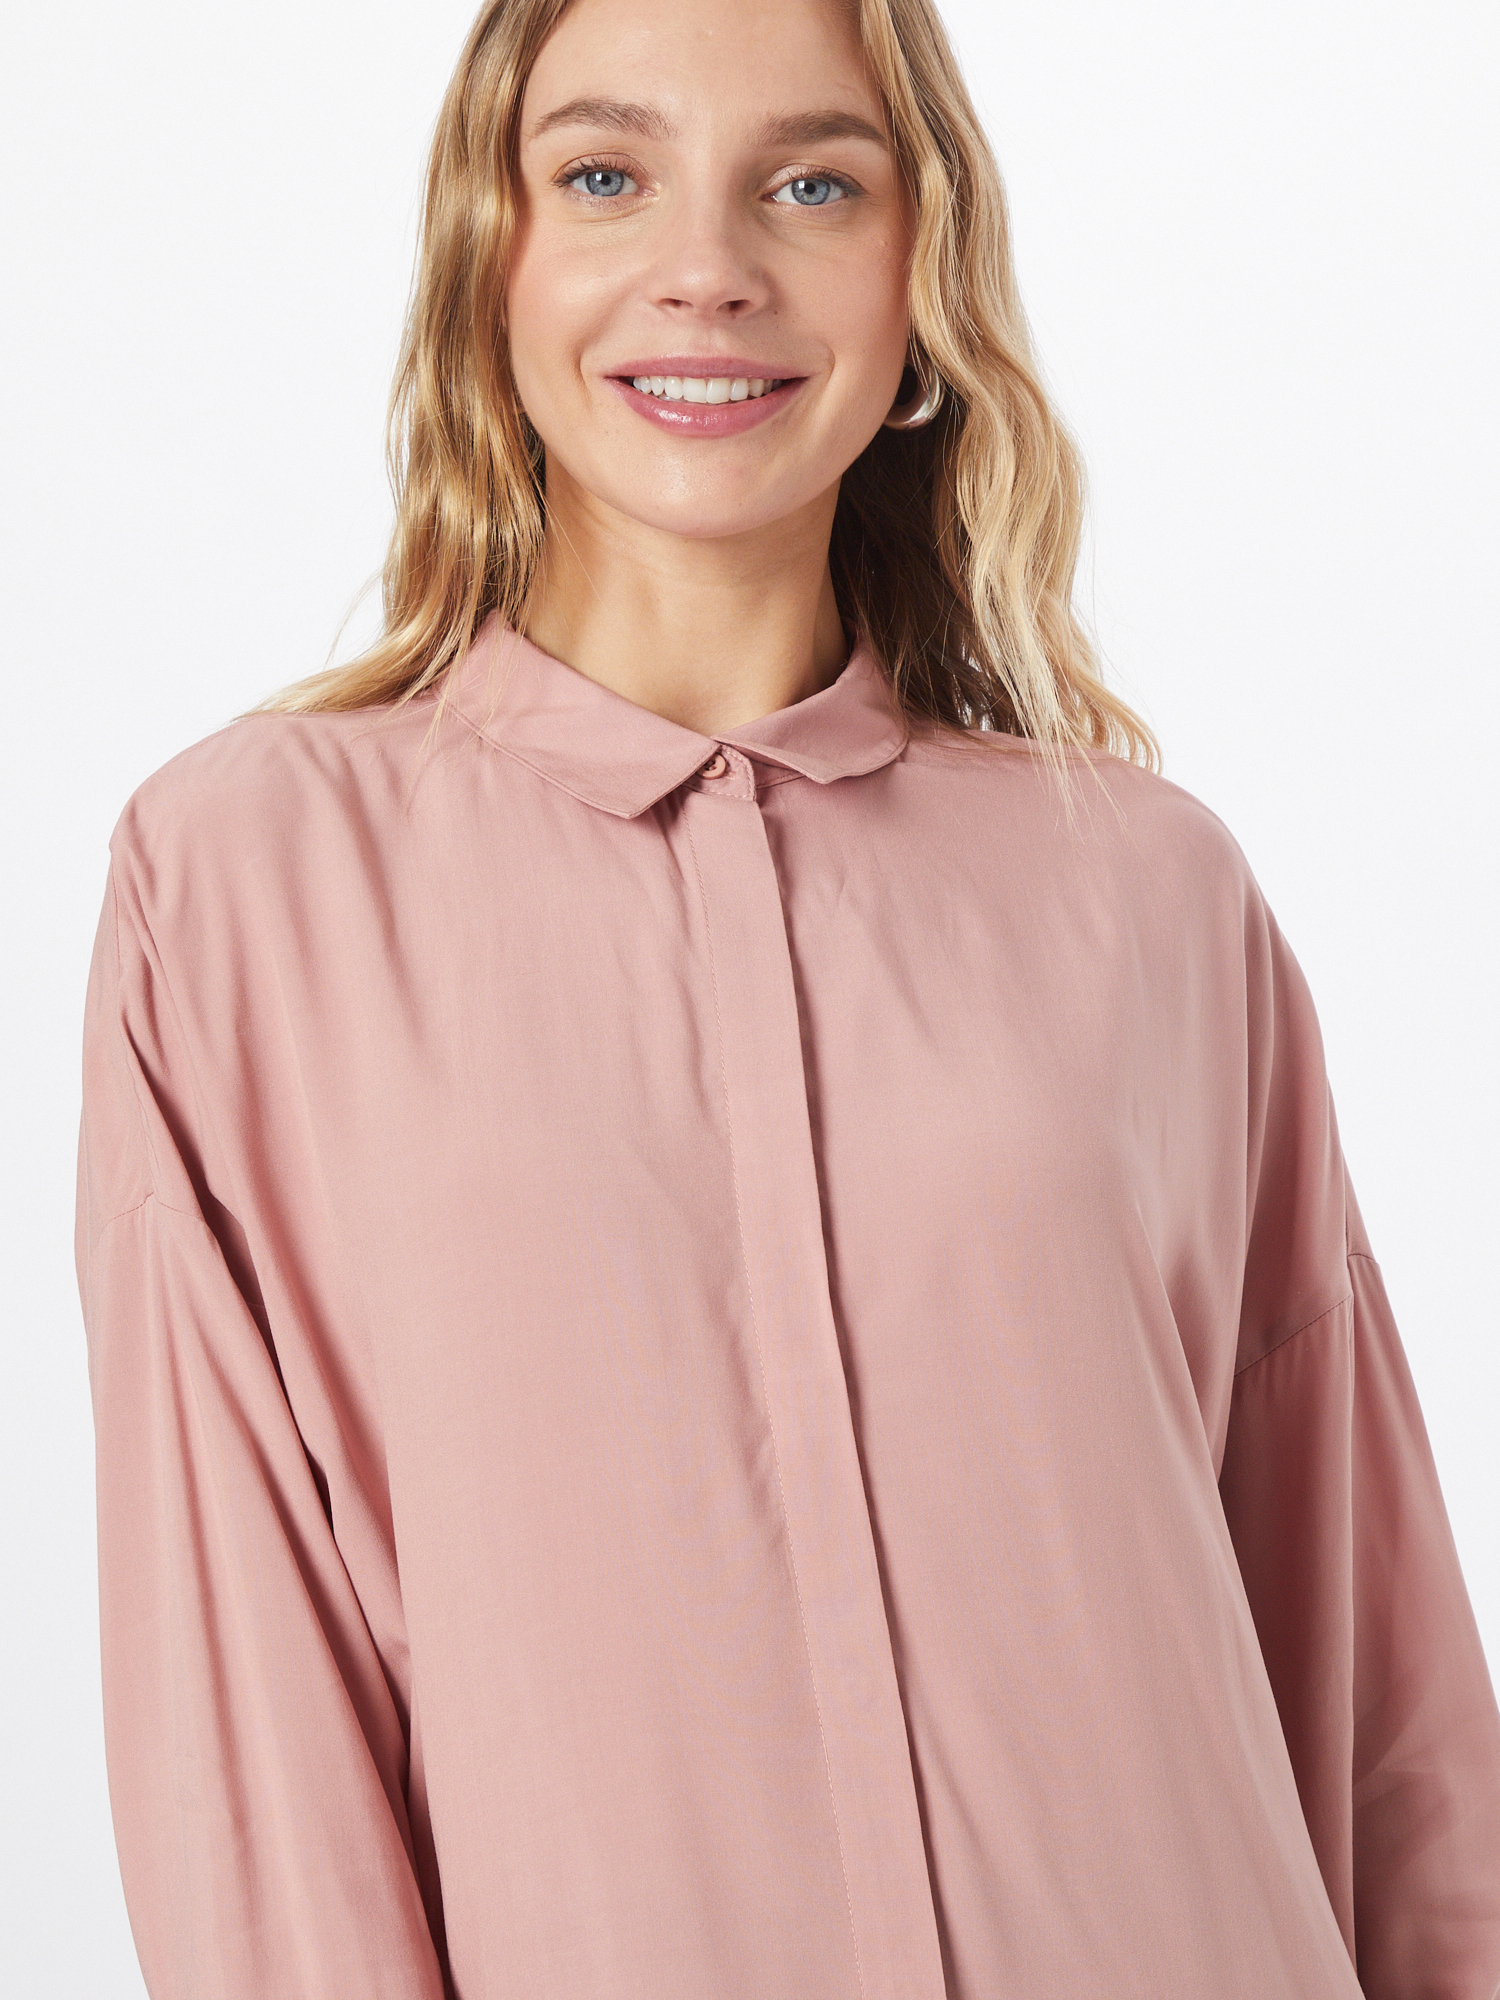 Soft Rebels Bluse FREEDOM in Altrosa 